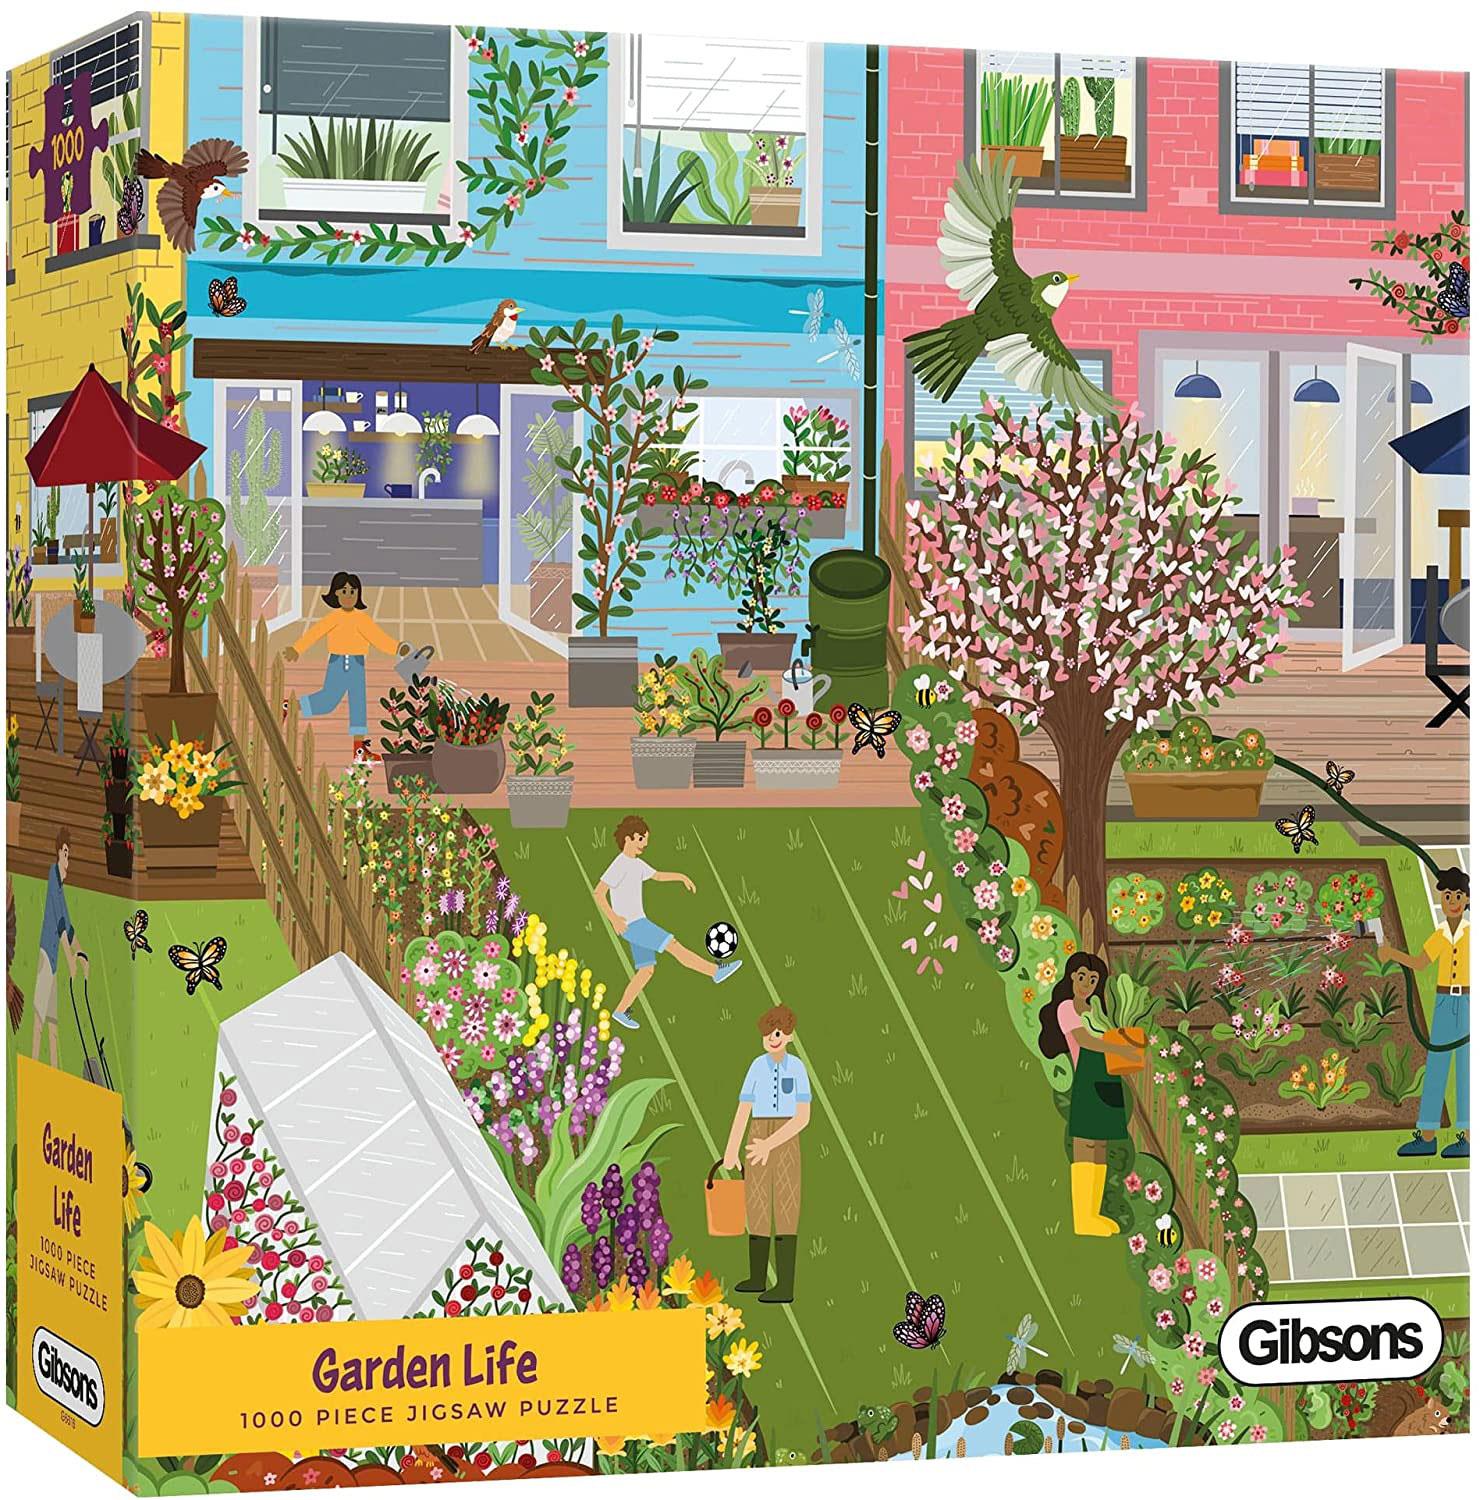 Gibsons Garden Life Jigsaw Puzzle (1000 Pieces)